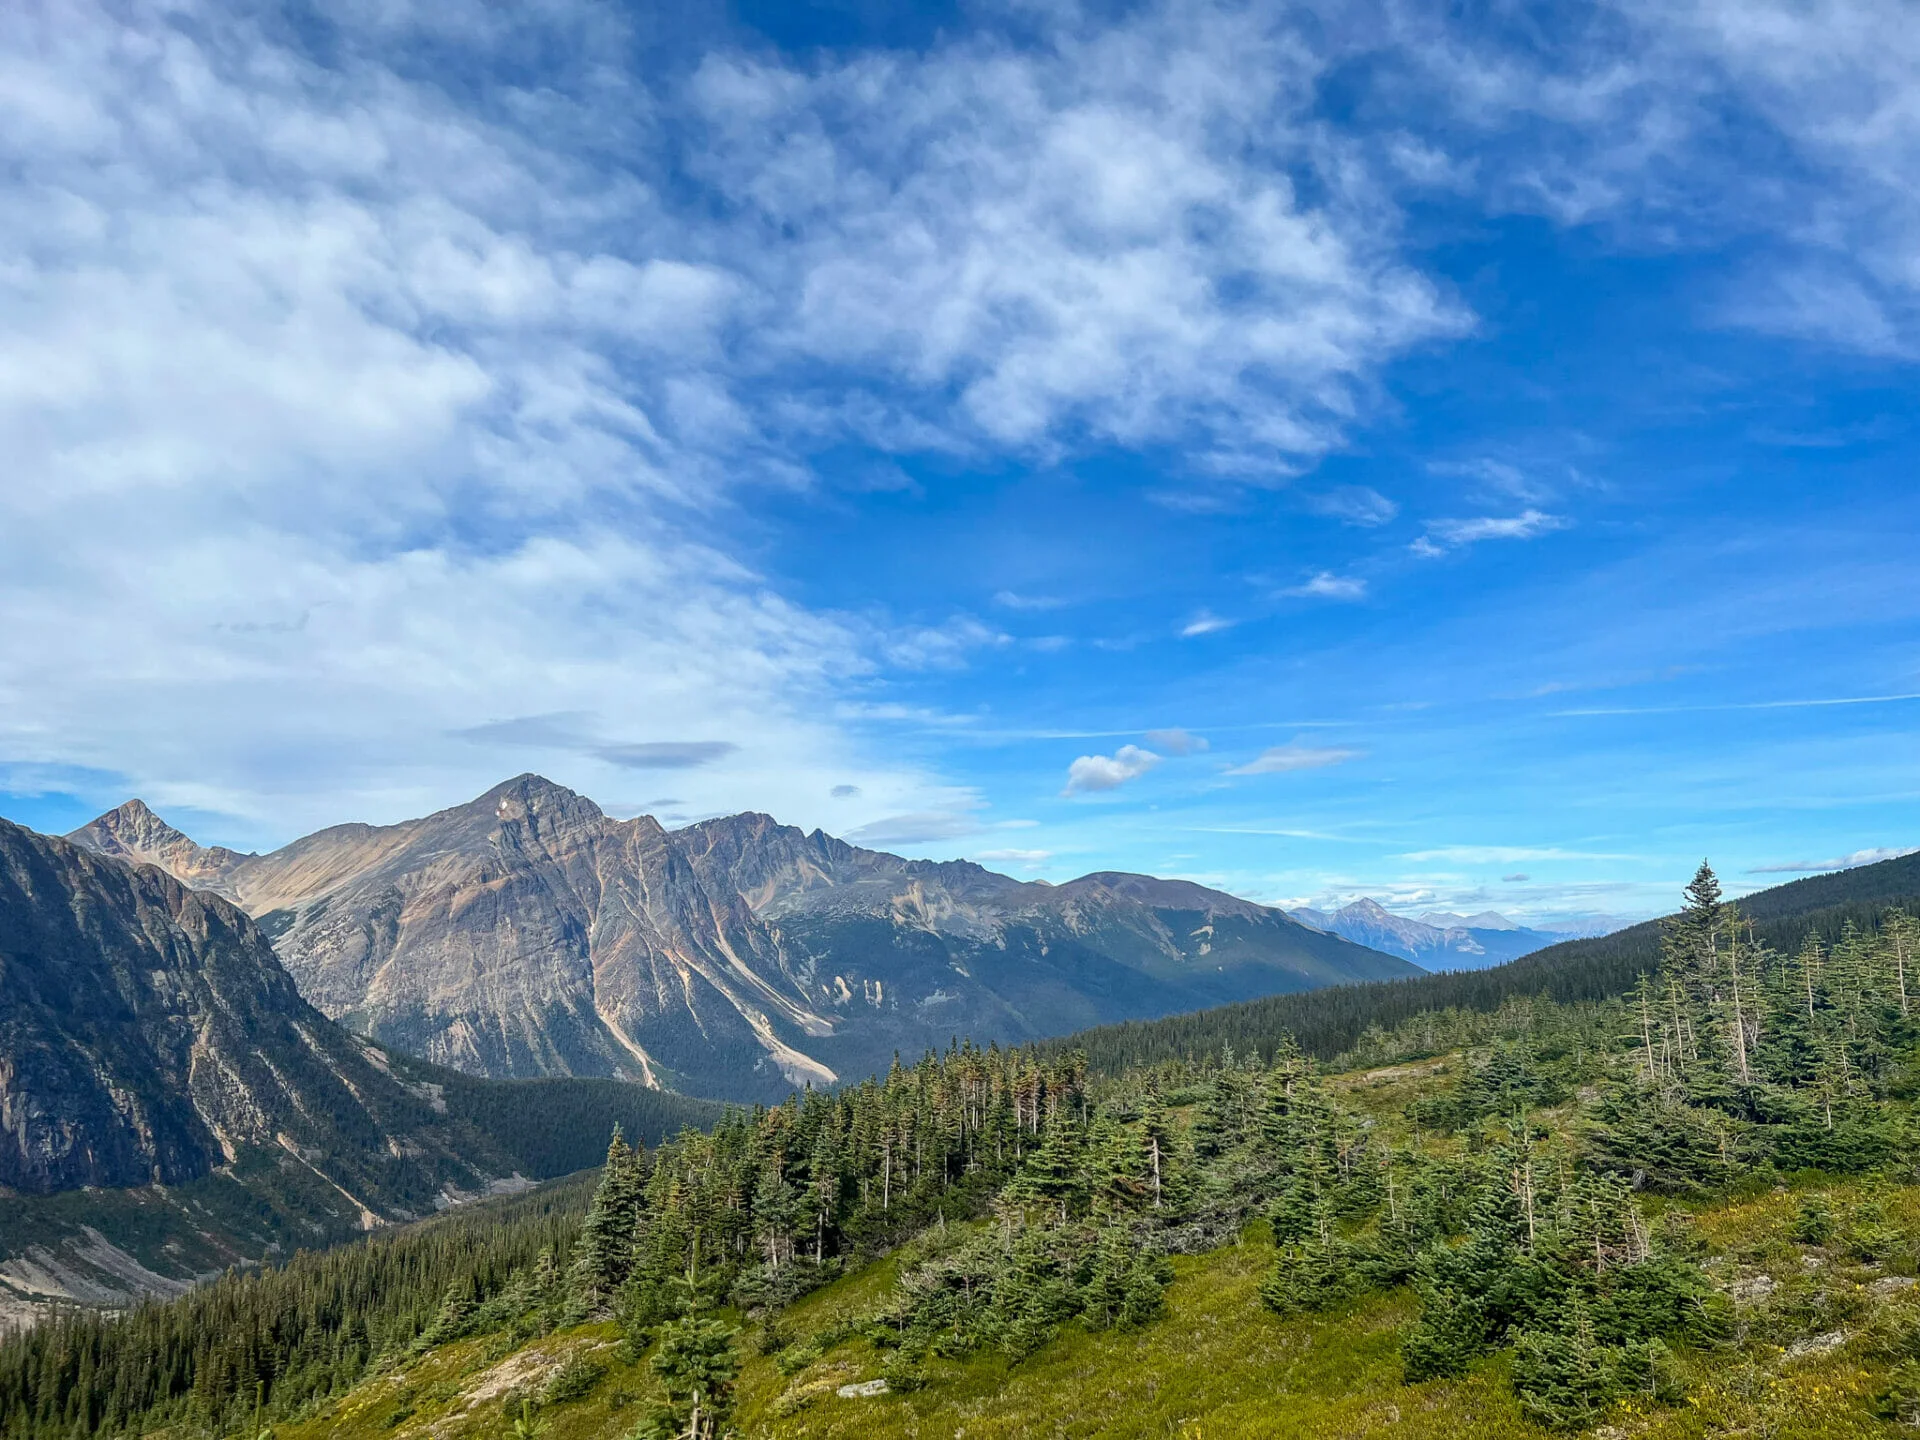 Hiking the Edith Cavell Meadows Trail